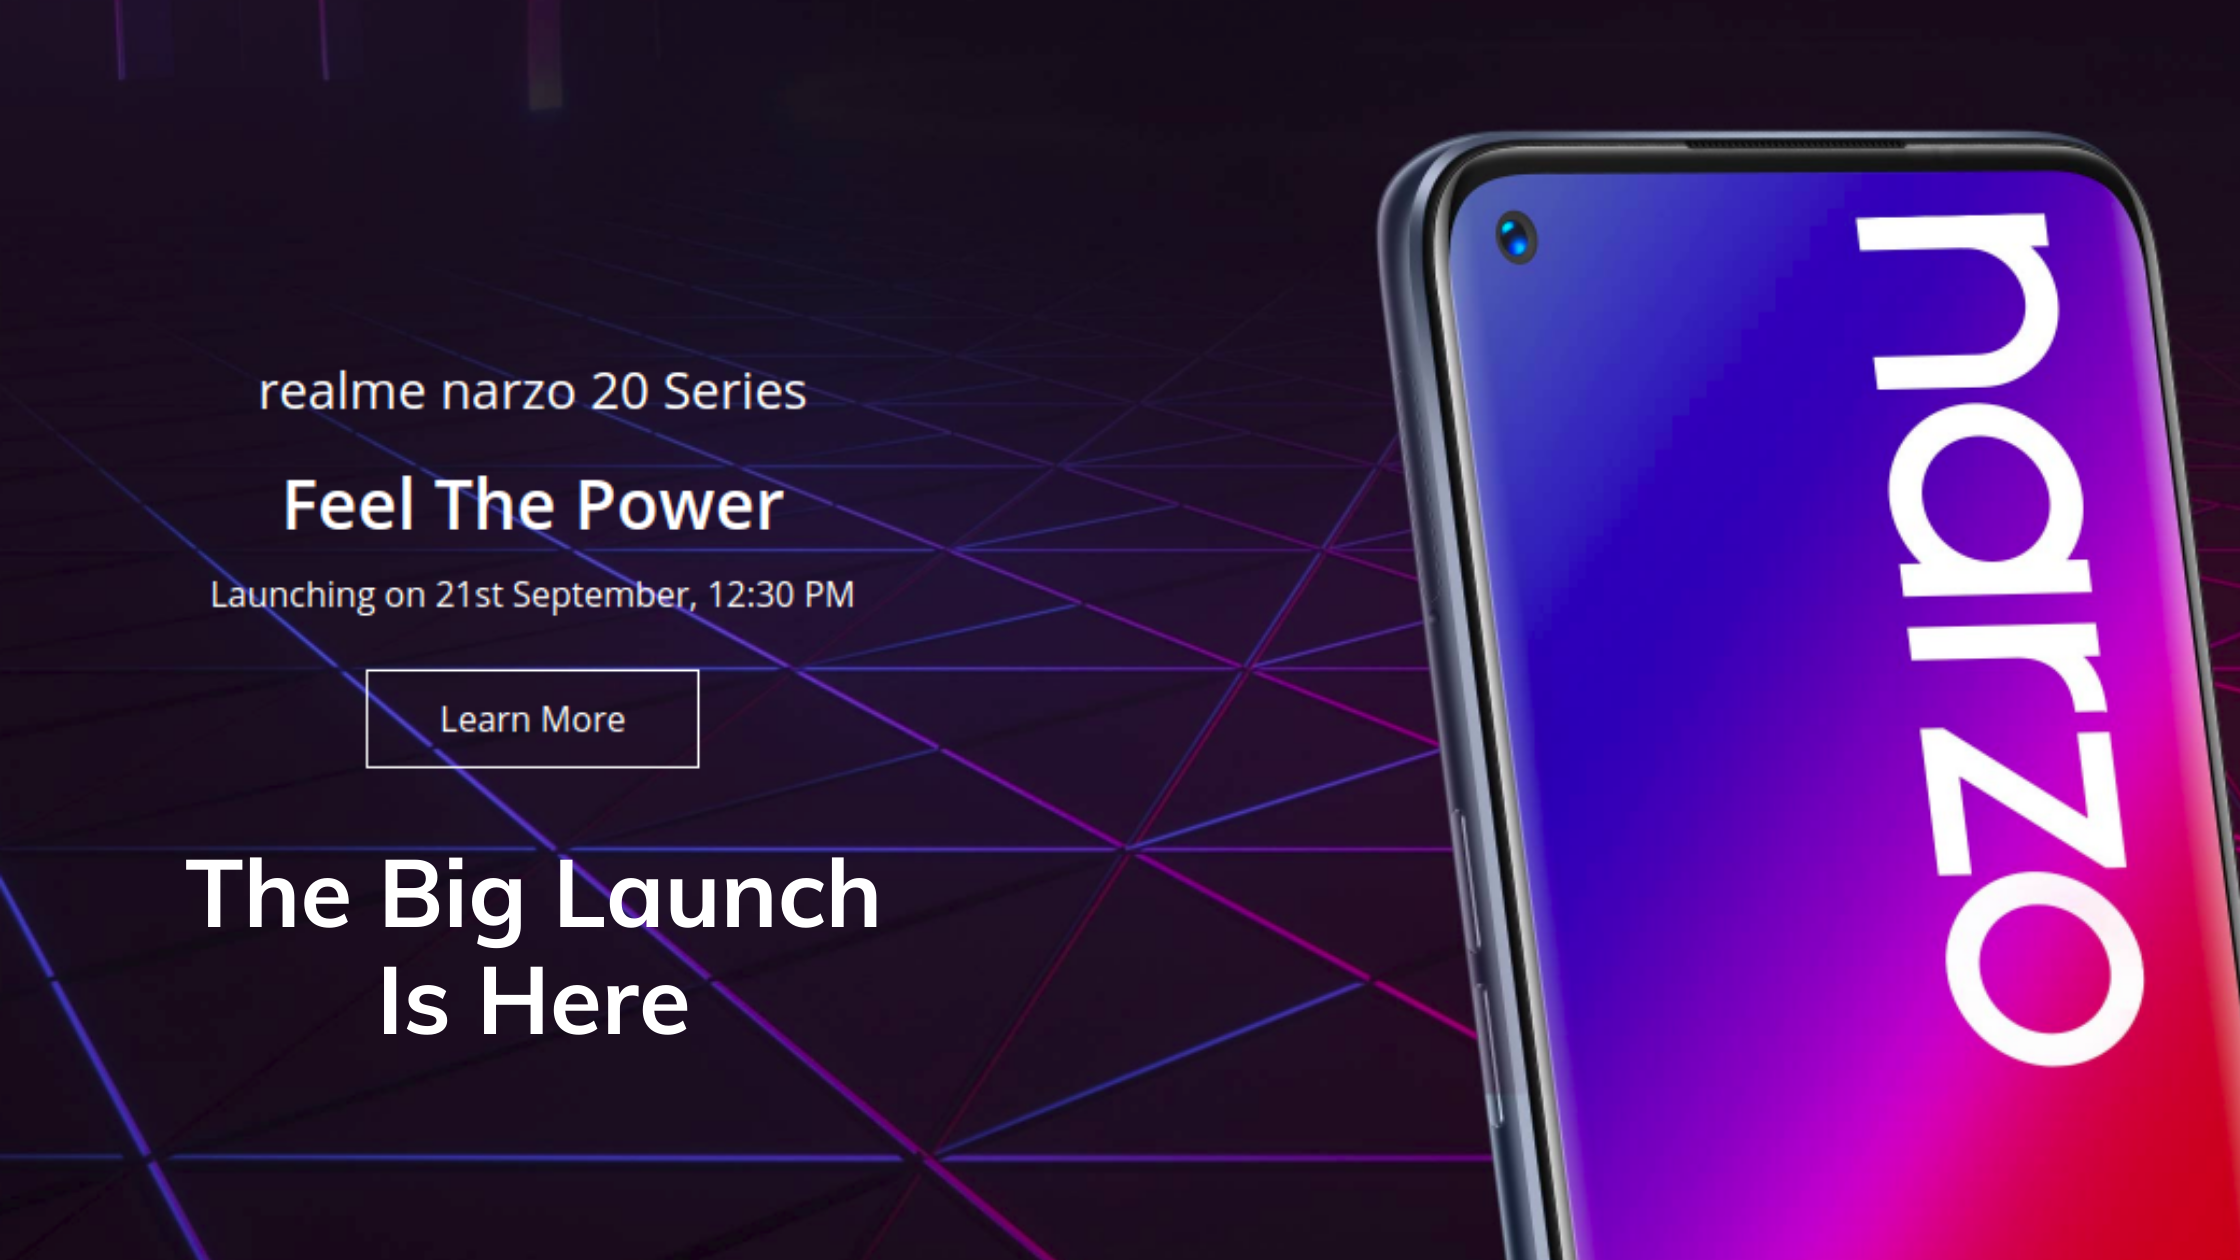 Realme Narzo 20 Series Launch in India - Arriving On September 21